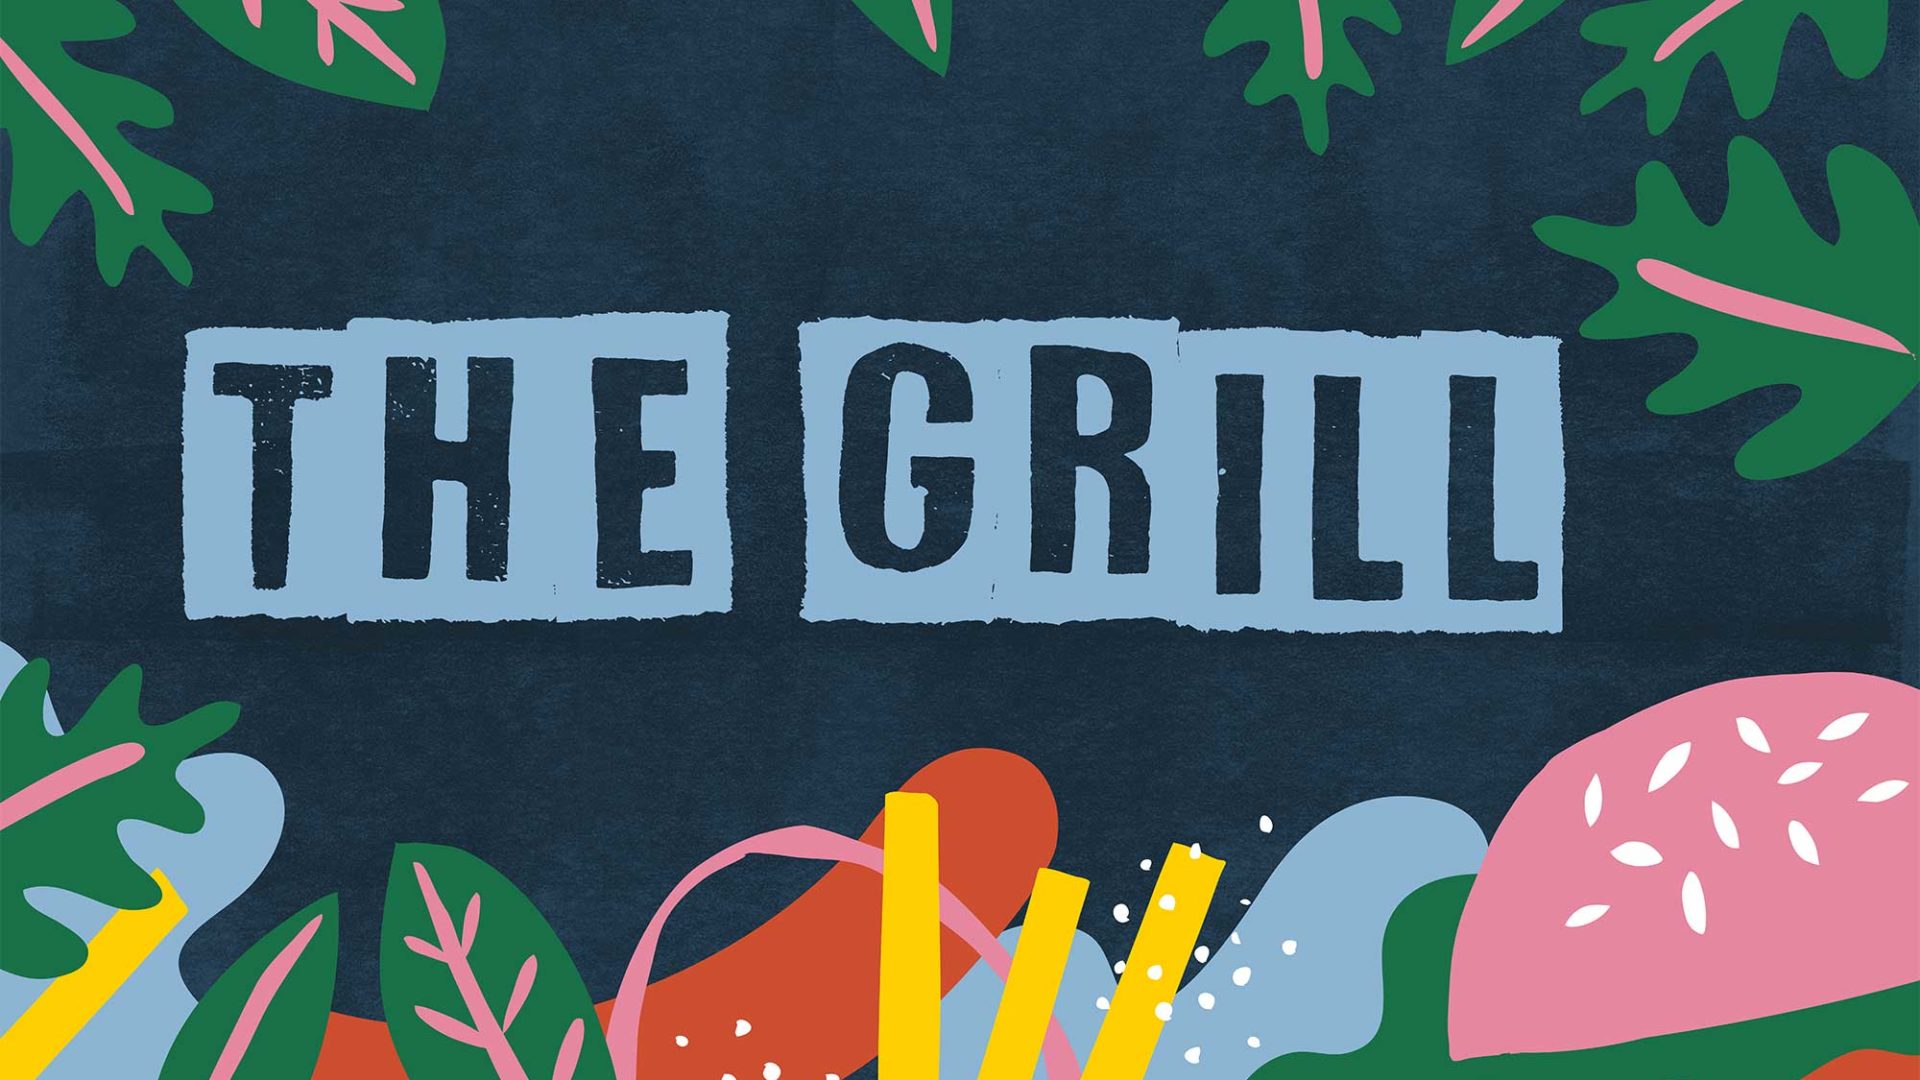 Eden Project The Grill branding